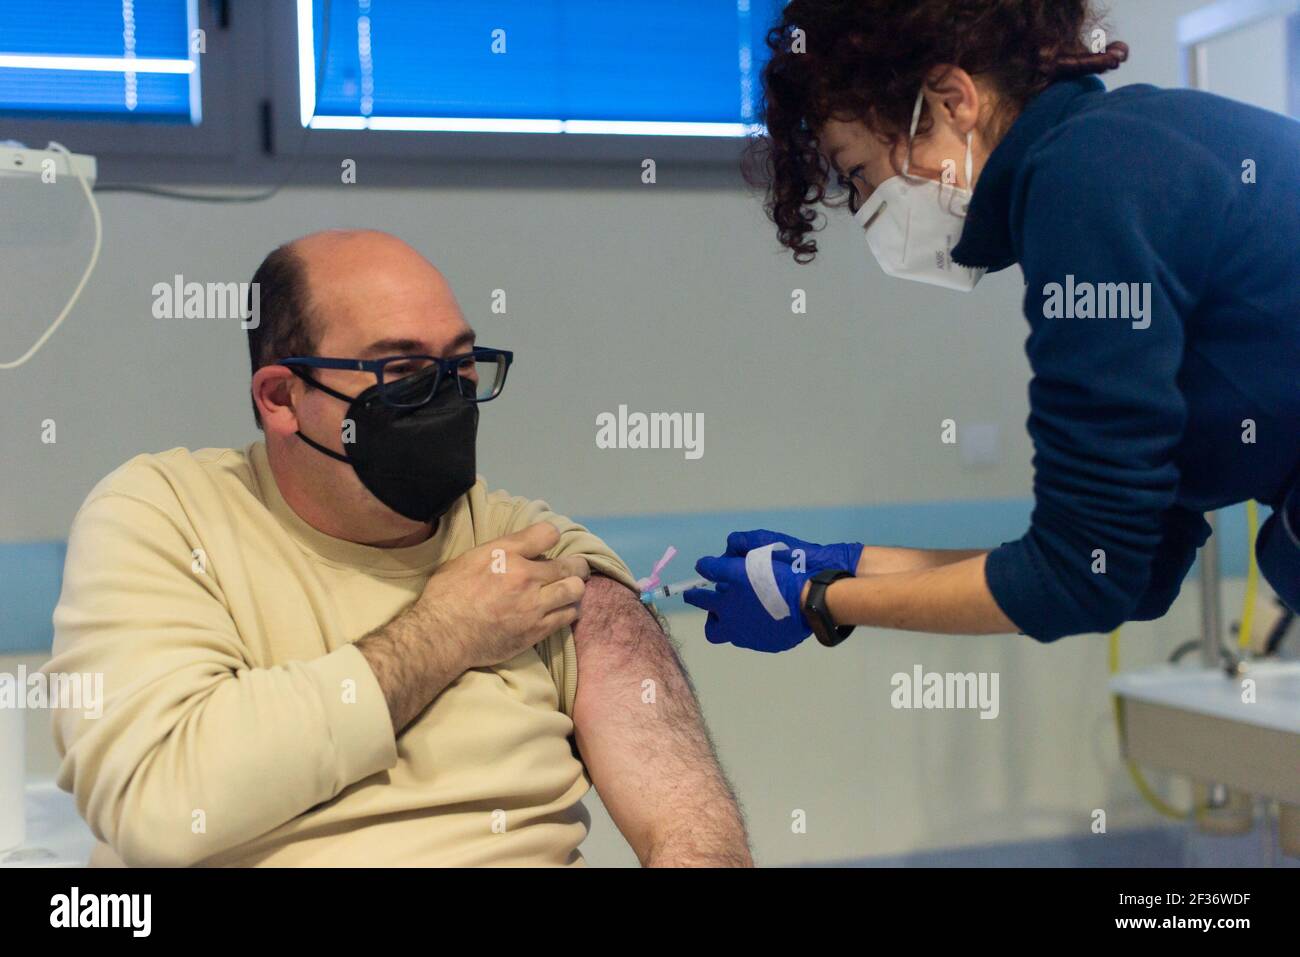 A healthcare worker administers Astra Zeneca COVID19 Vaccine to a frontline workers at Coria City Hospital. Some European countries have cancelled the administration of AstraZeneca vaccine due the appearance of some side effects in people who had received it recently. Stock Photo